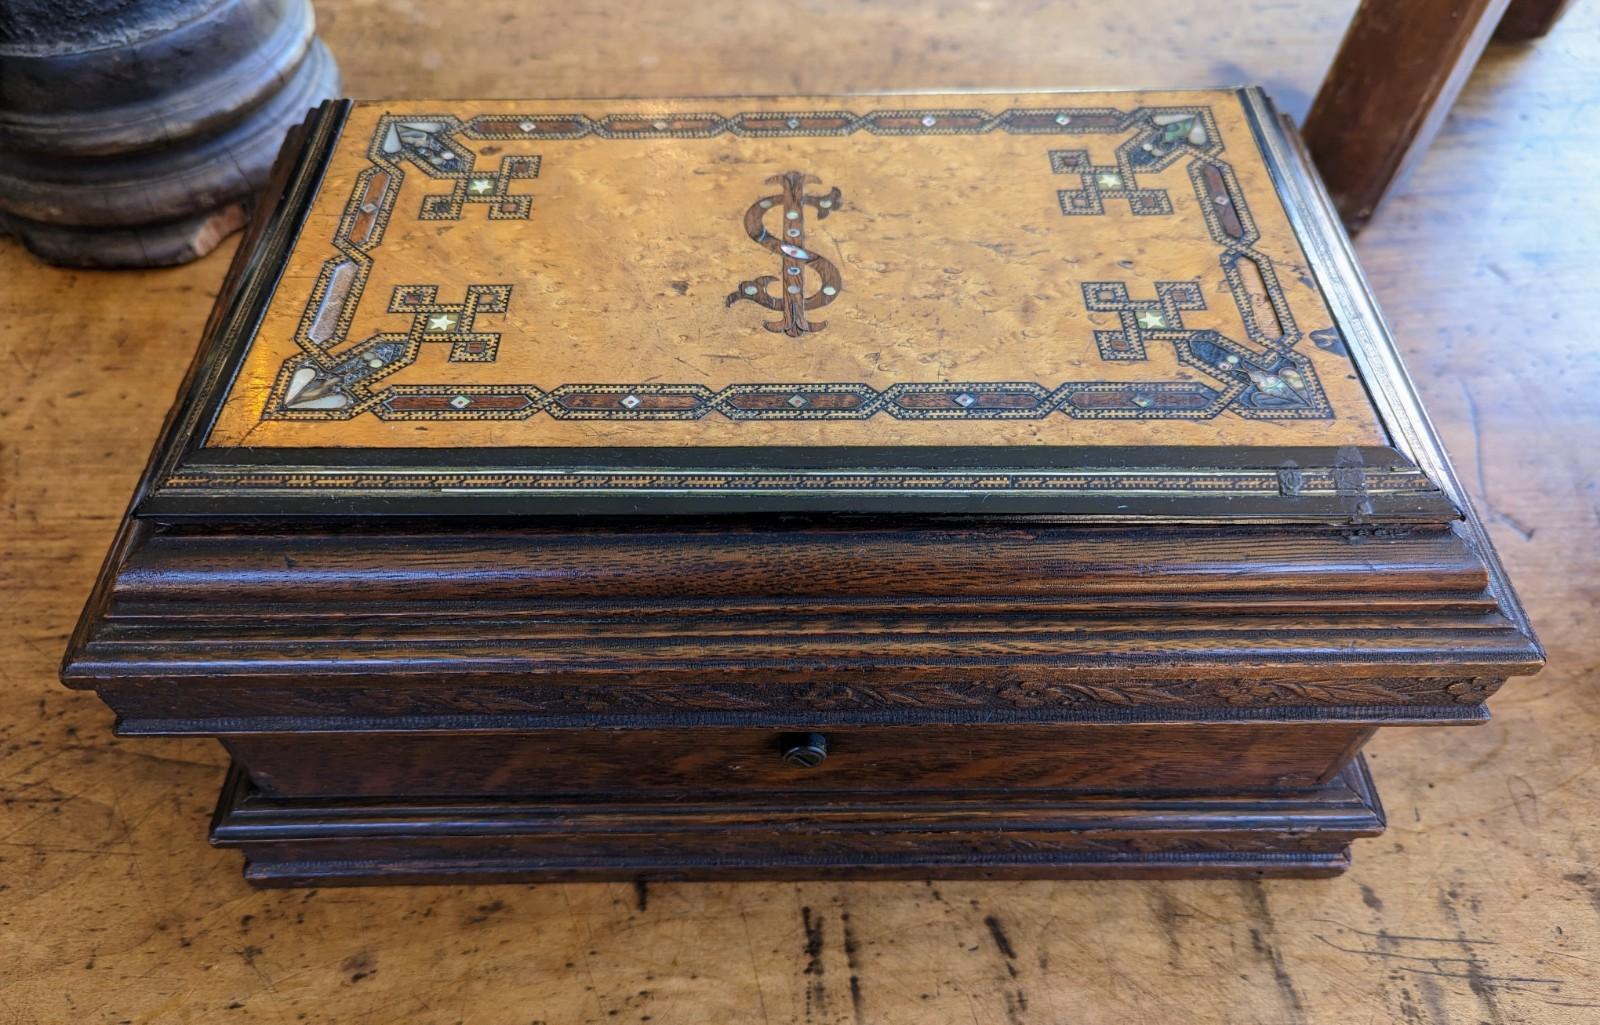 Intriguing antique hand crafted wood box with marquetry top. This decorative box features paua shell and mother of pearl inlay, there are also two secret compartments which makes this a unique collectable piece! The top features a design that looks